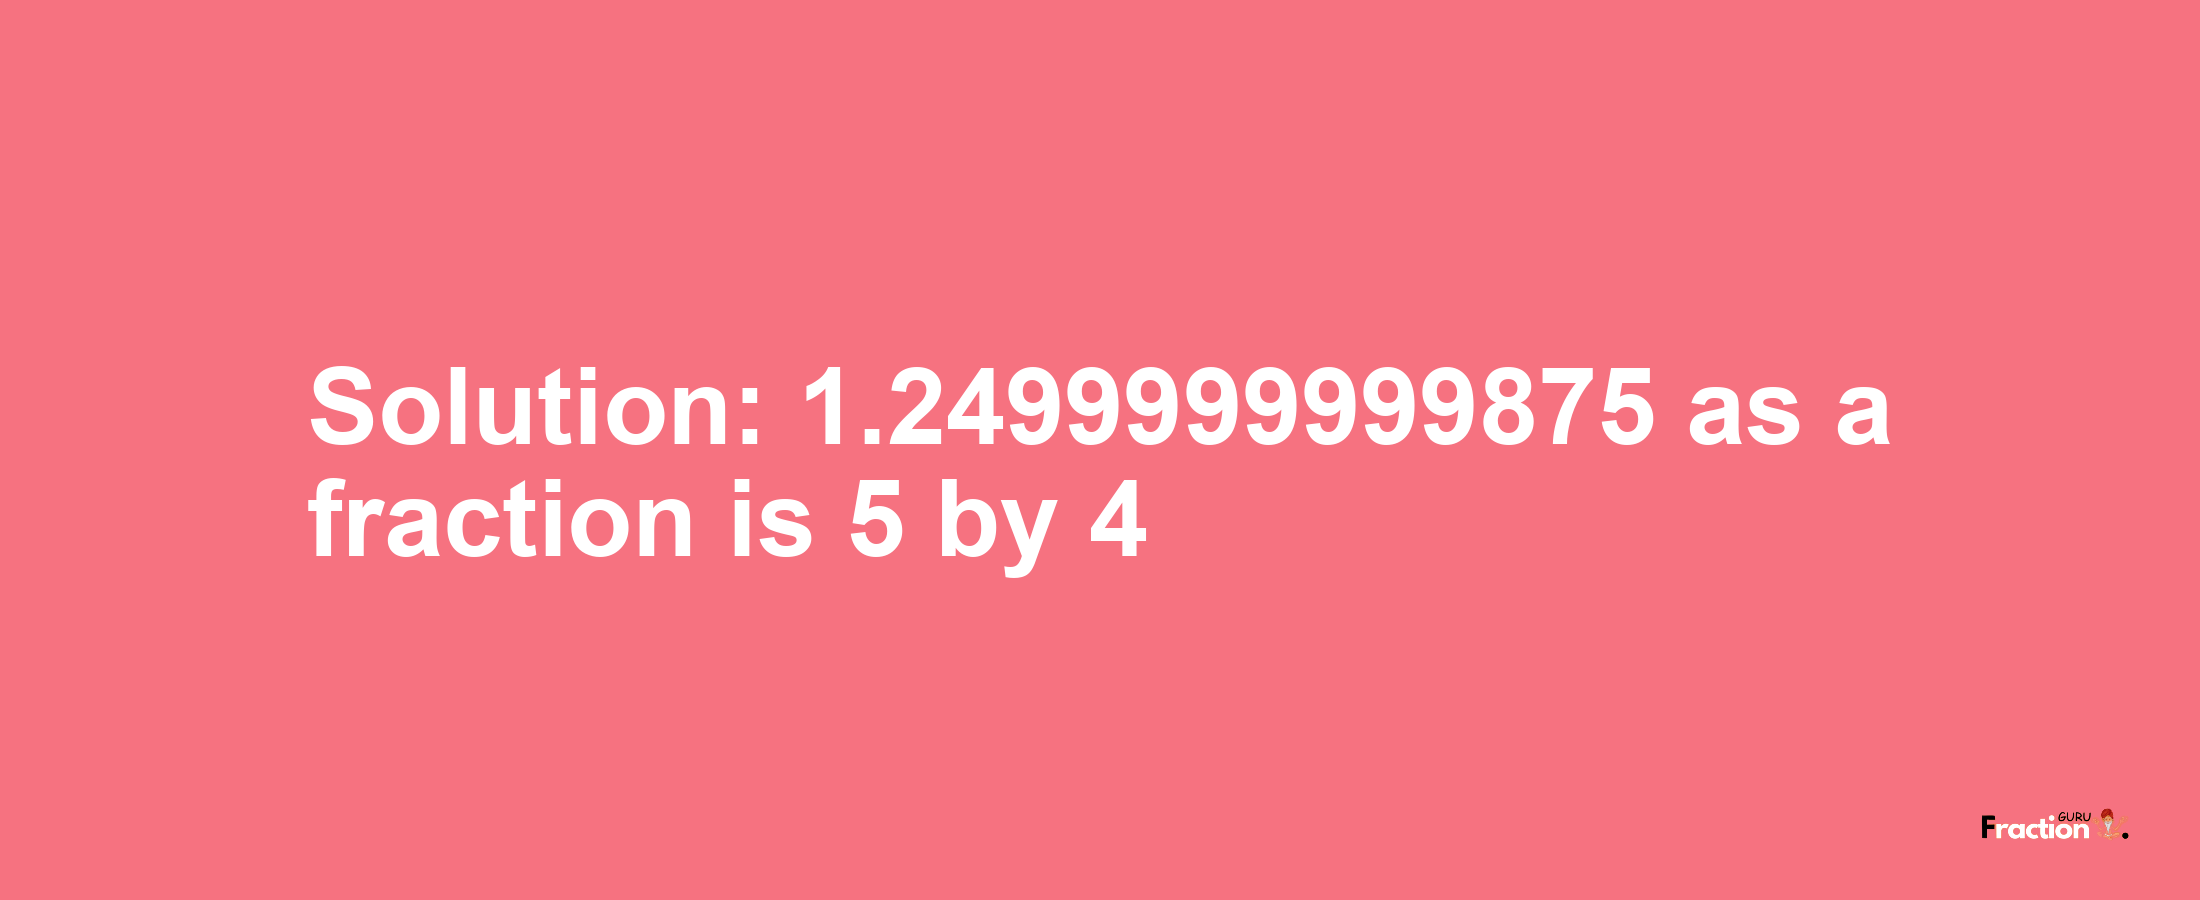 Solution:1.2499999999875 as a fraction is 5/4